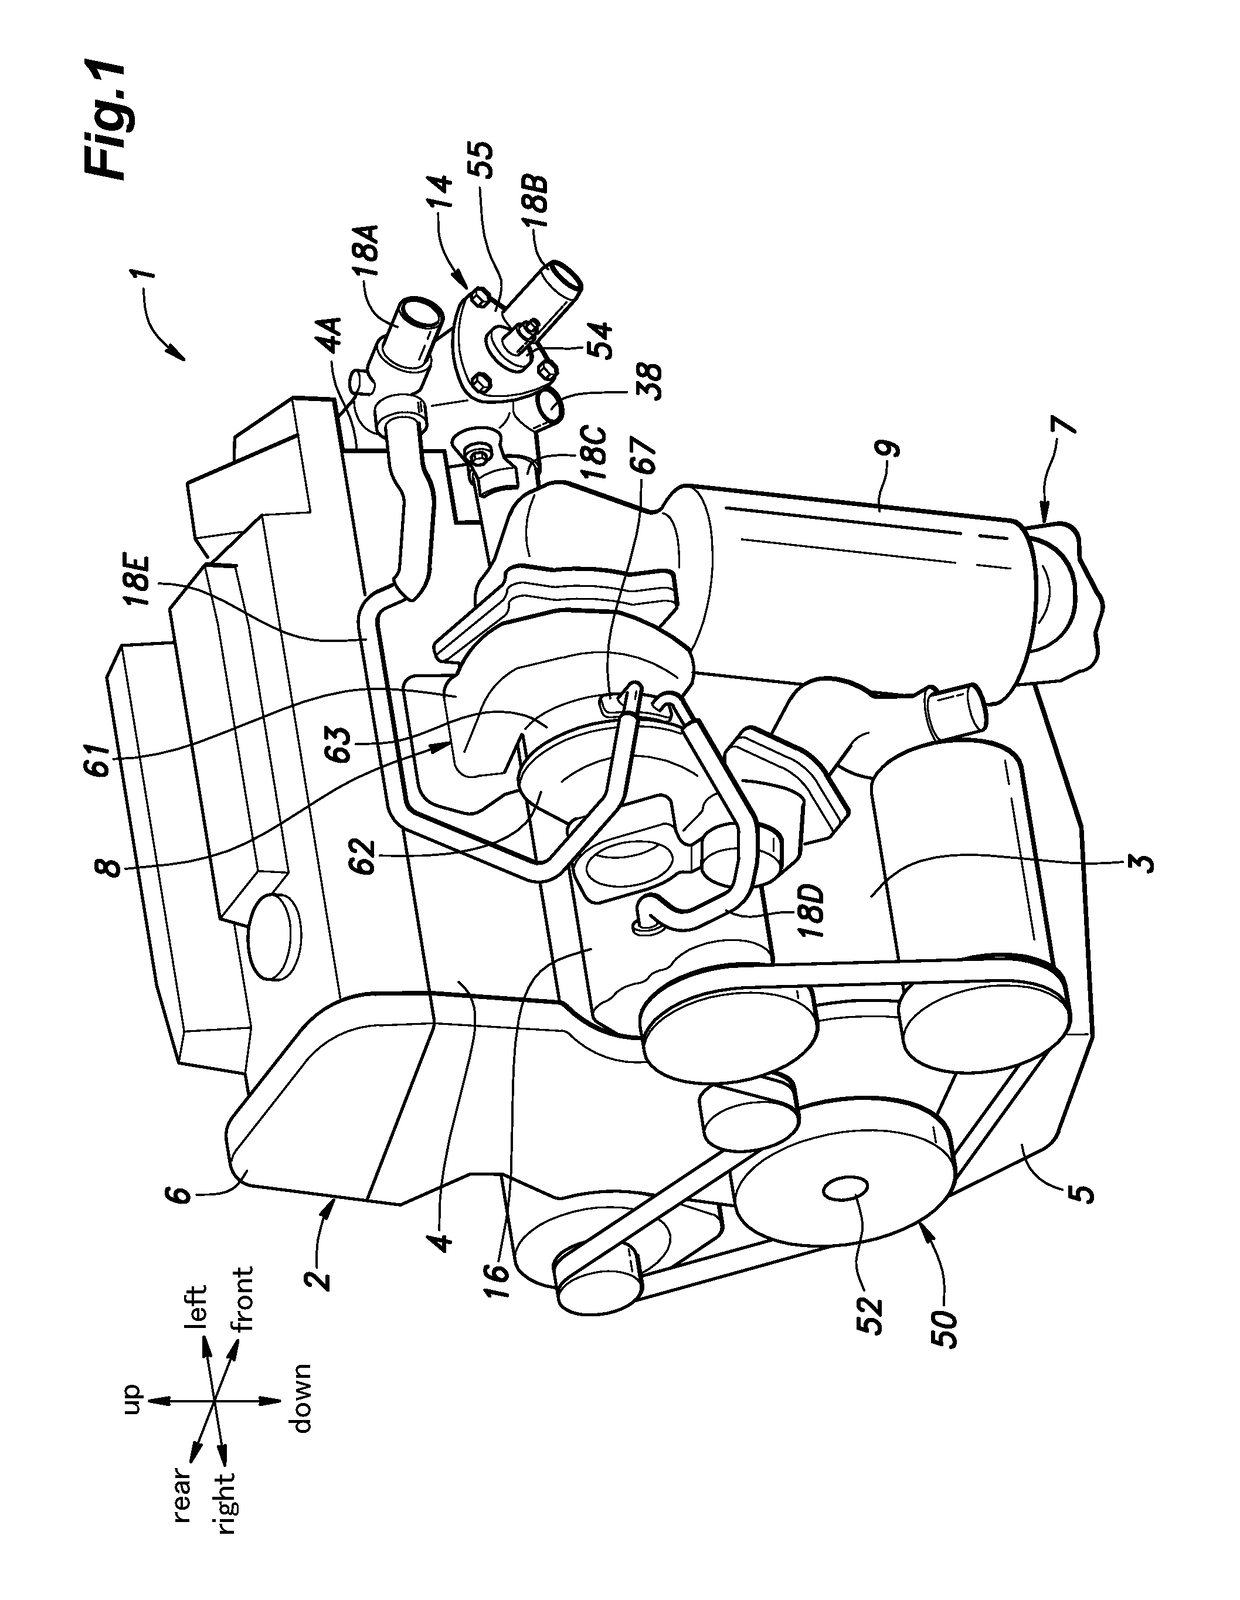 Cooling water passage structure for internal combustion engine